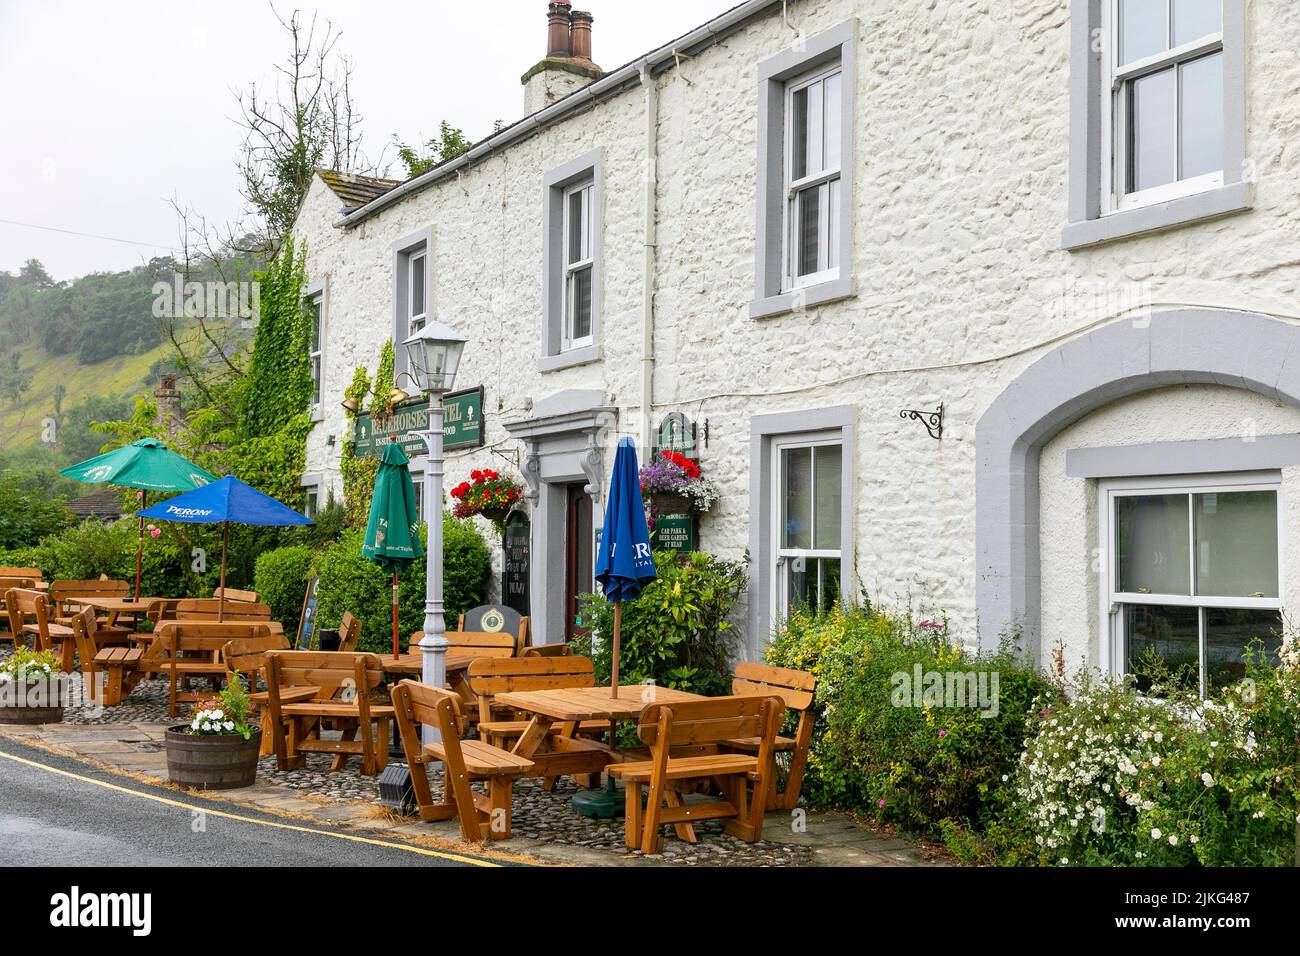 Kettlewell, village in the Yorkshire Dales used for film production and local pub the Racehorses Hotel with front beer garden,Yorkshire,England,summer Stock Photo